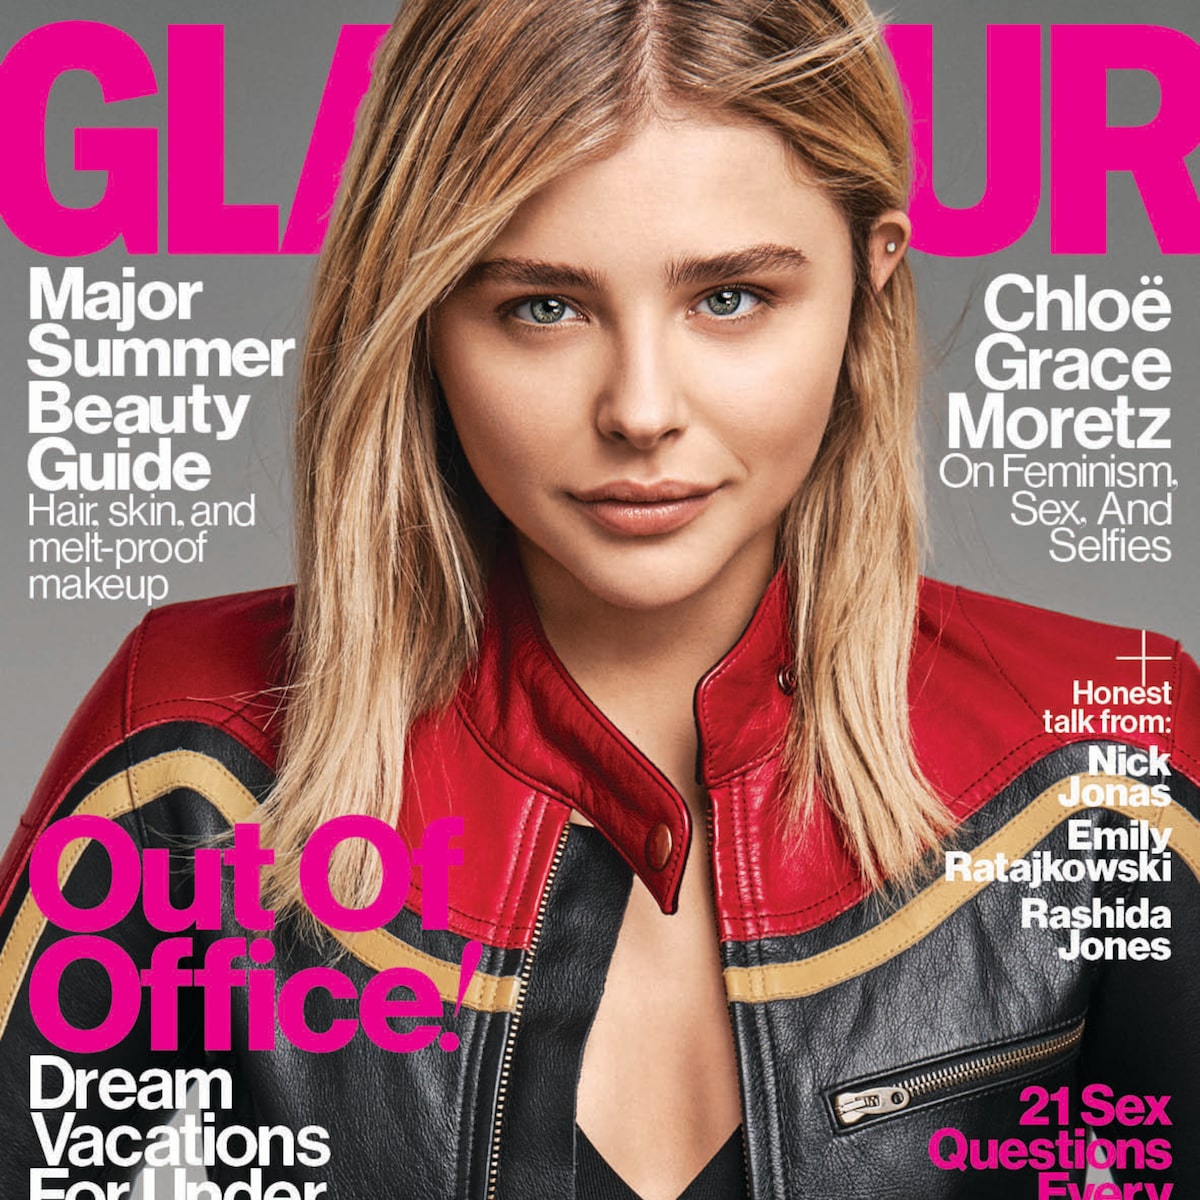 di xiao recommends Chloe Grace Moretz Nude Pictures